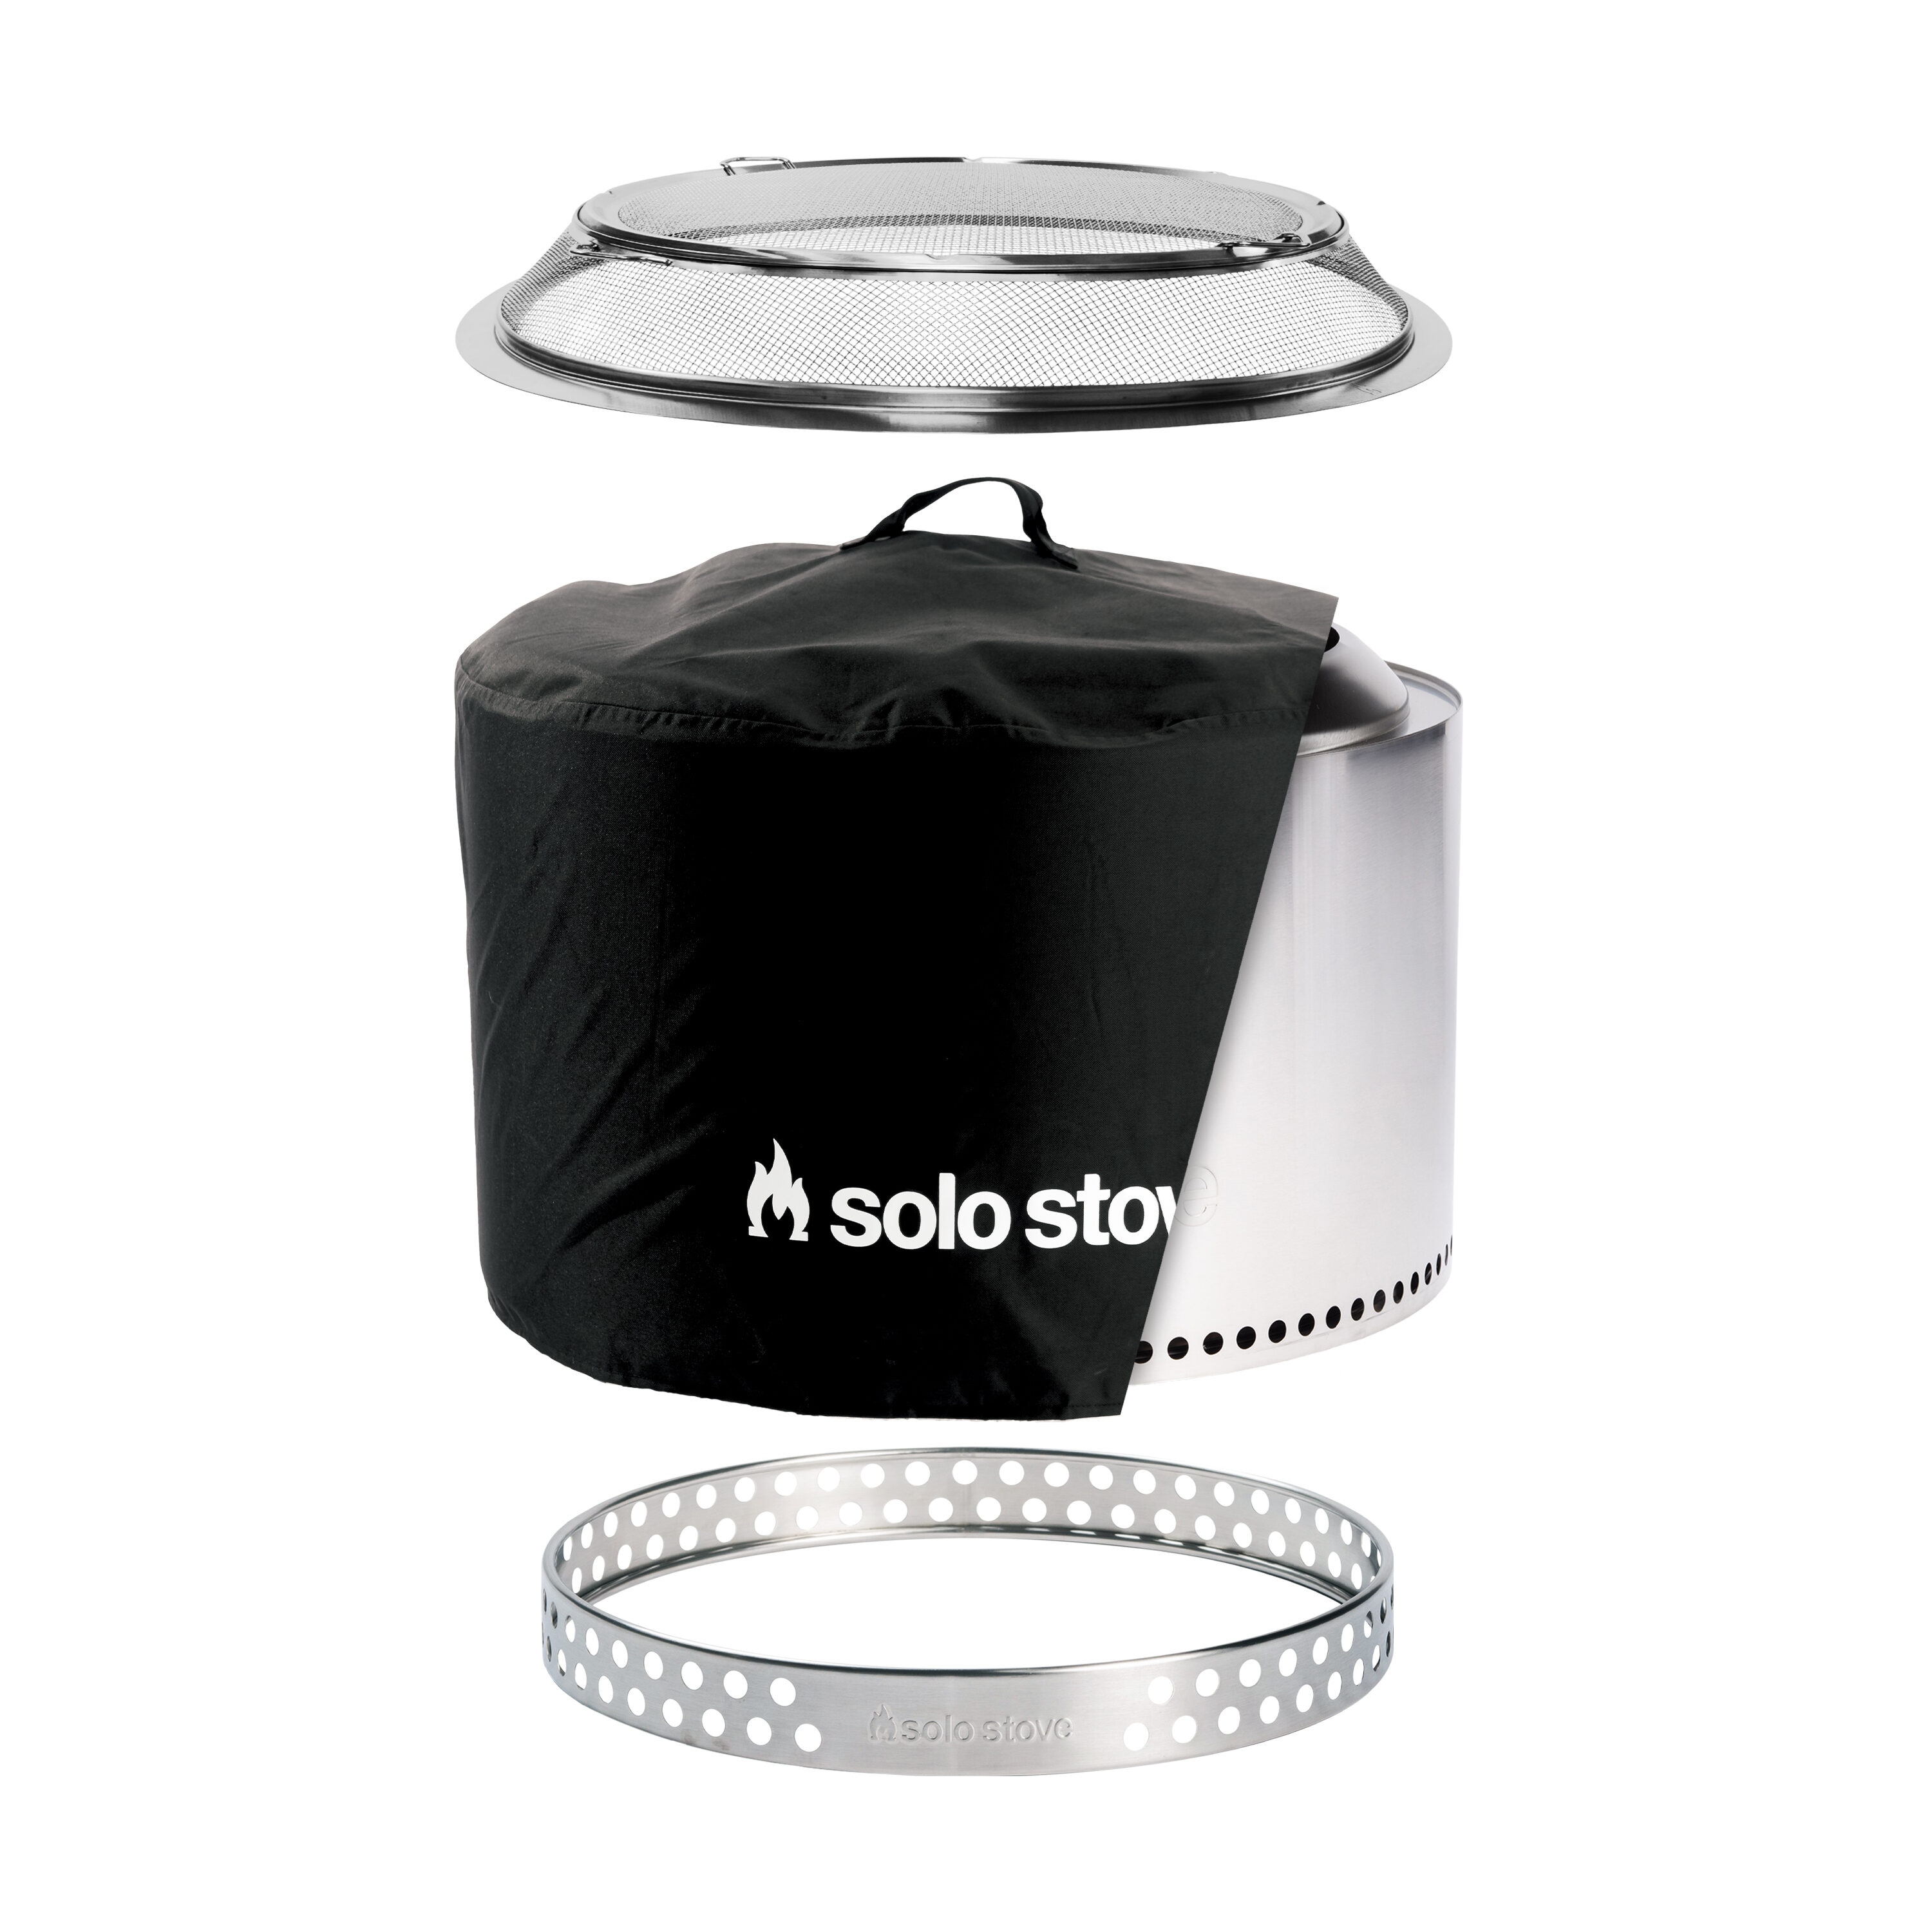 Solo Stove Grill Ultimate Bundle review - Reviewed